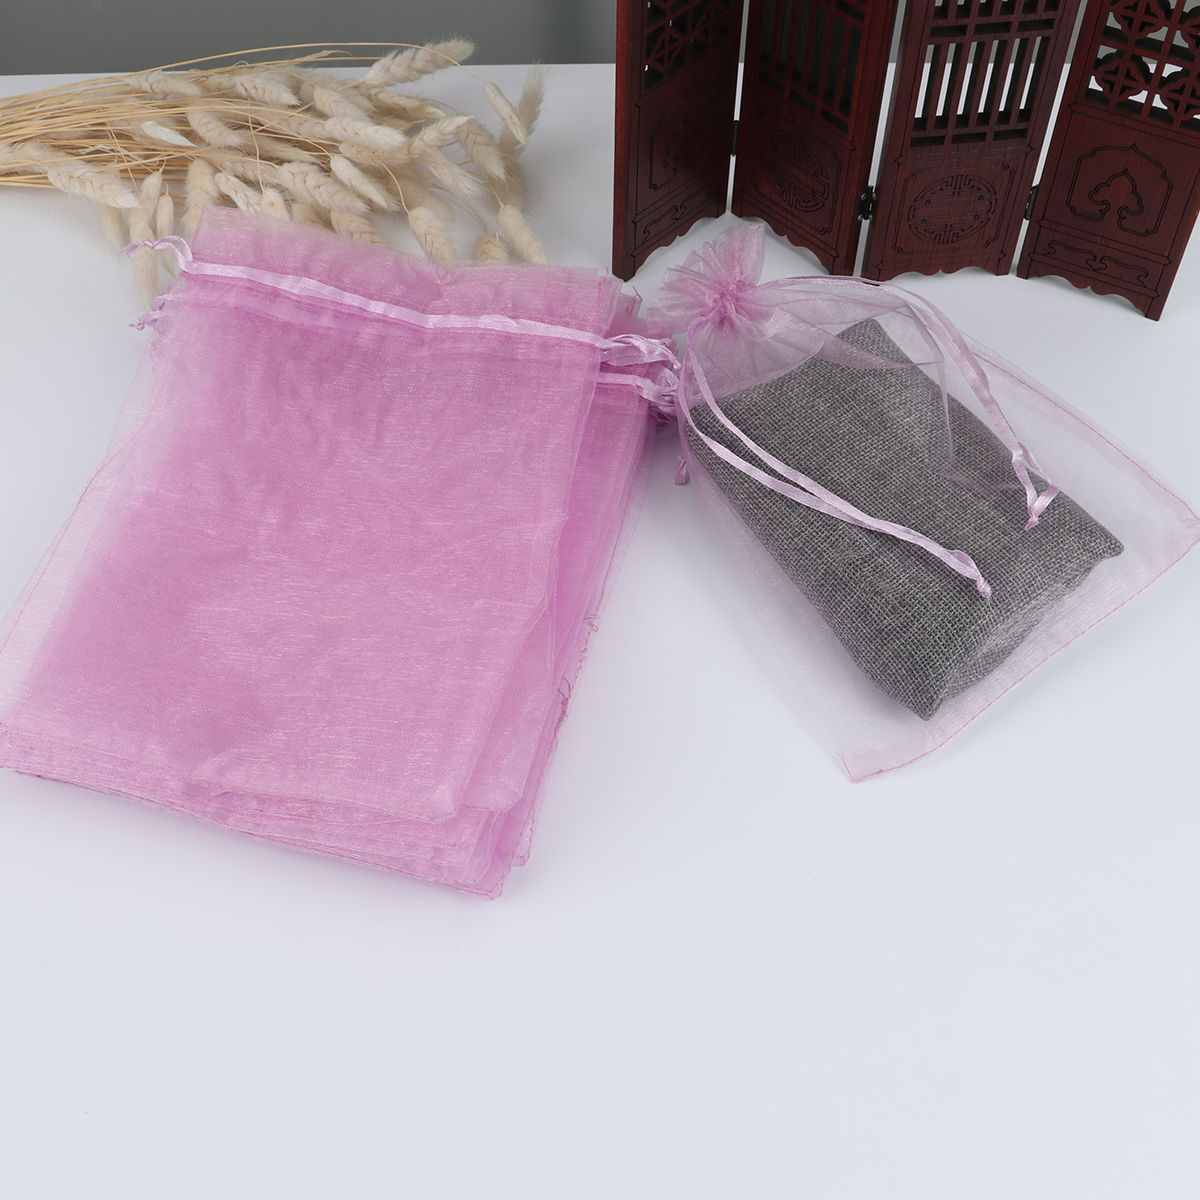 Picture of Wedding Gift Organza Jewelry Bags Drawstring Rectangle Mauve (Usable Space: 19x16.5cm) 23cm x 17cm, 20 PCs